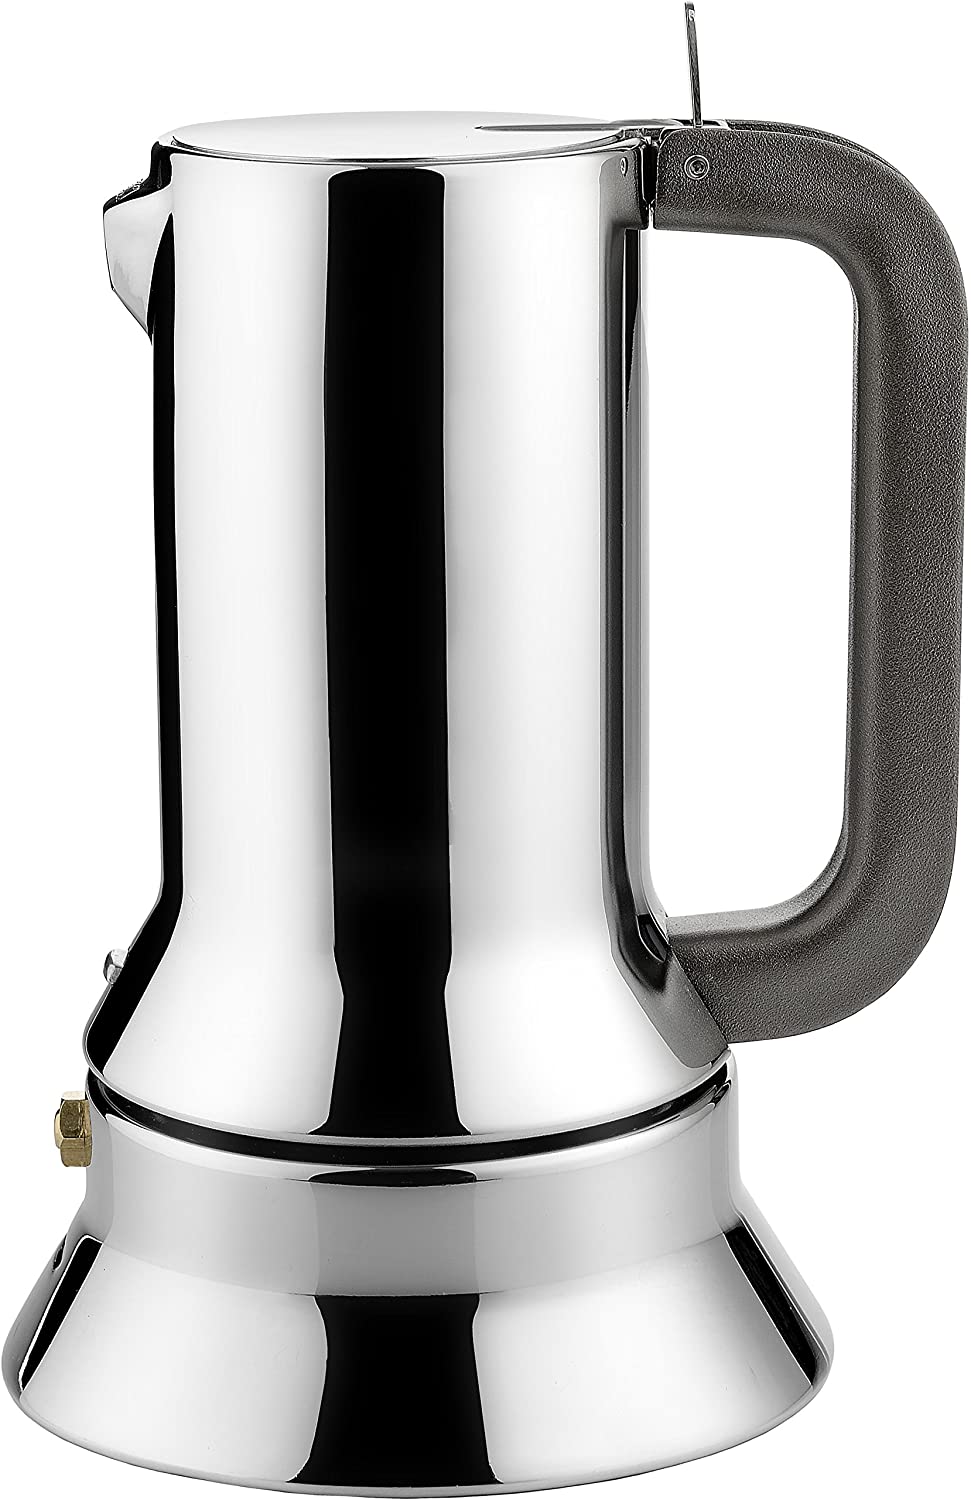 Alessi 3-Cup Espresso Coffee Maker in 18/10 Stainless Steel Mirror Polished with Magnetic Heat Diffusing Bottom